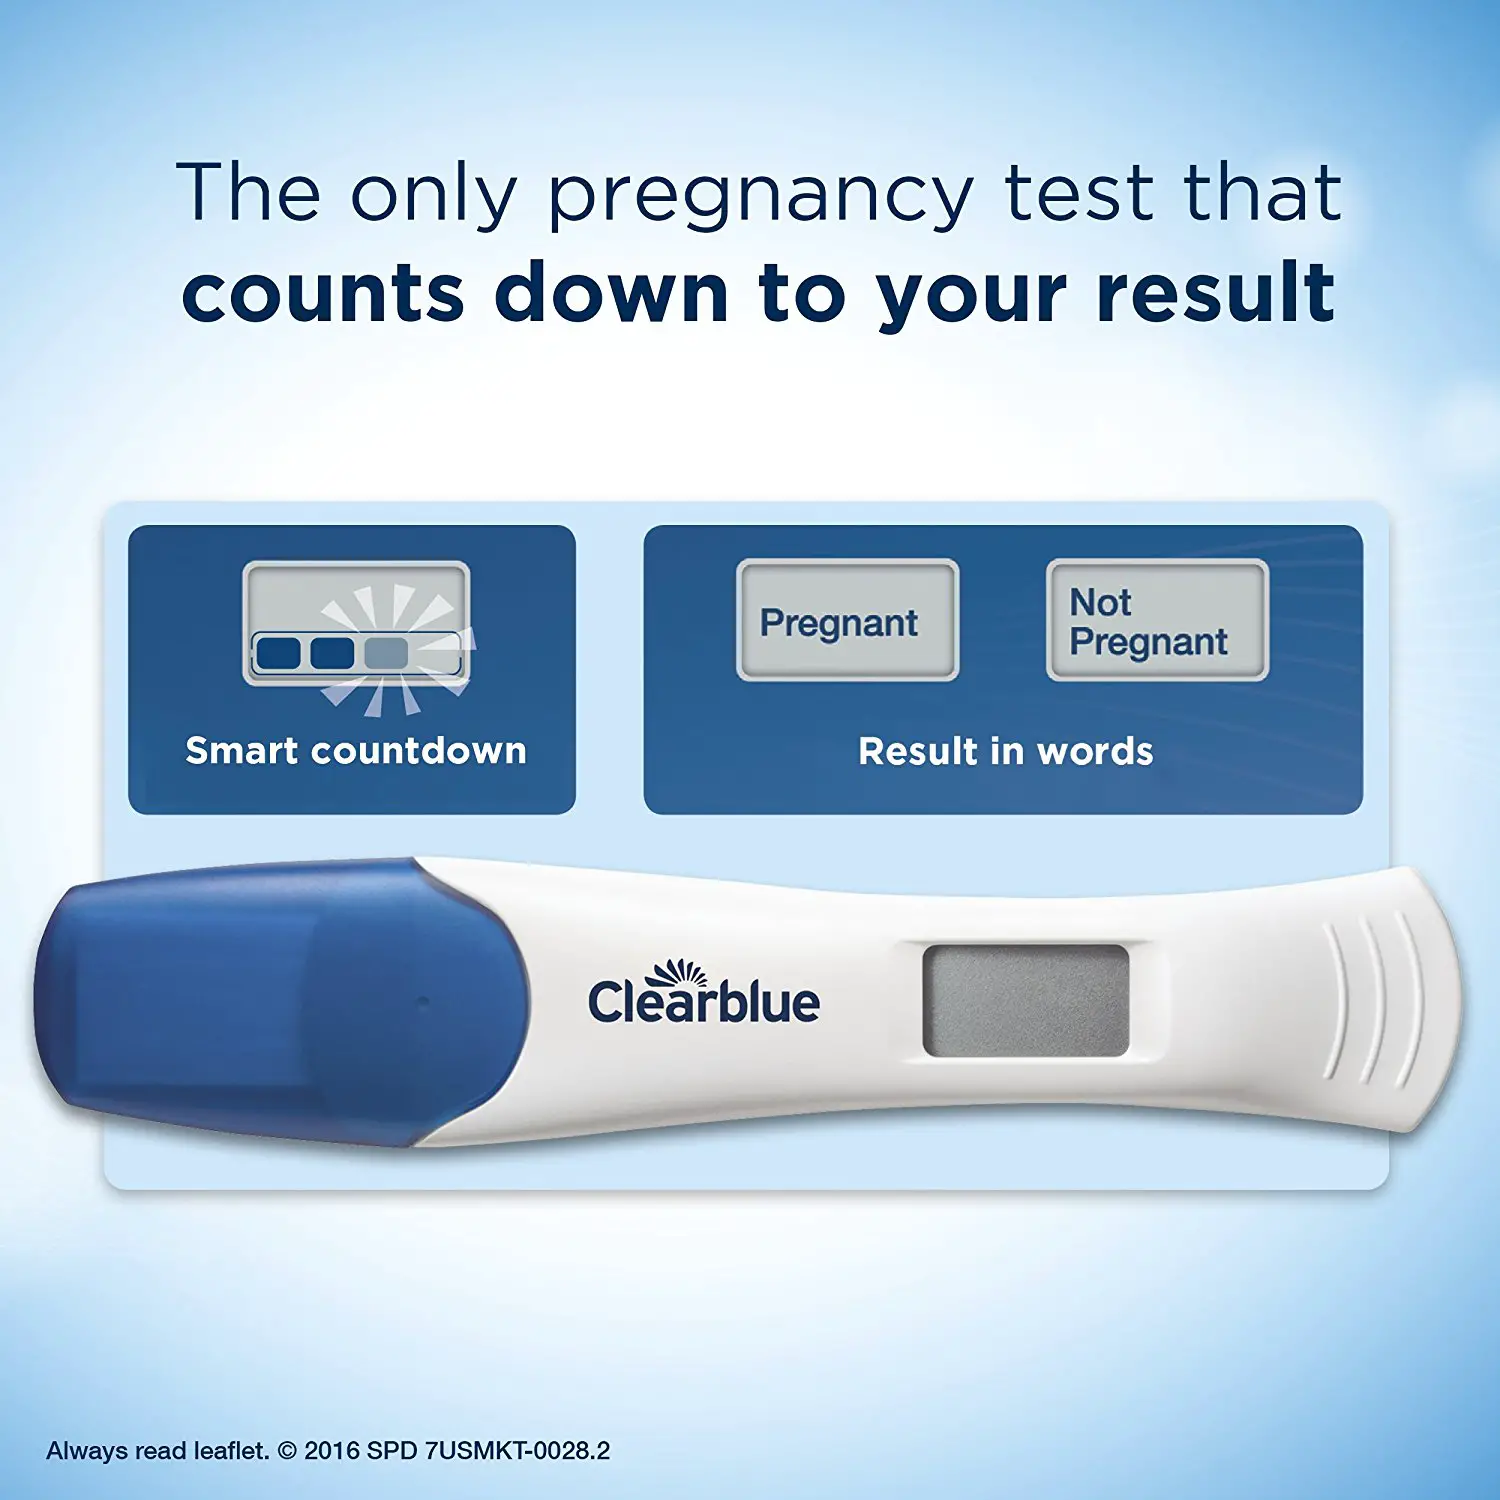 Clearblue Digital Pregnancy Test with Conception Indicator reviews